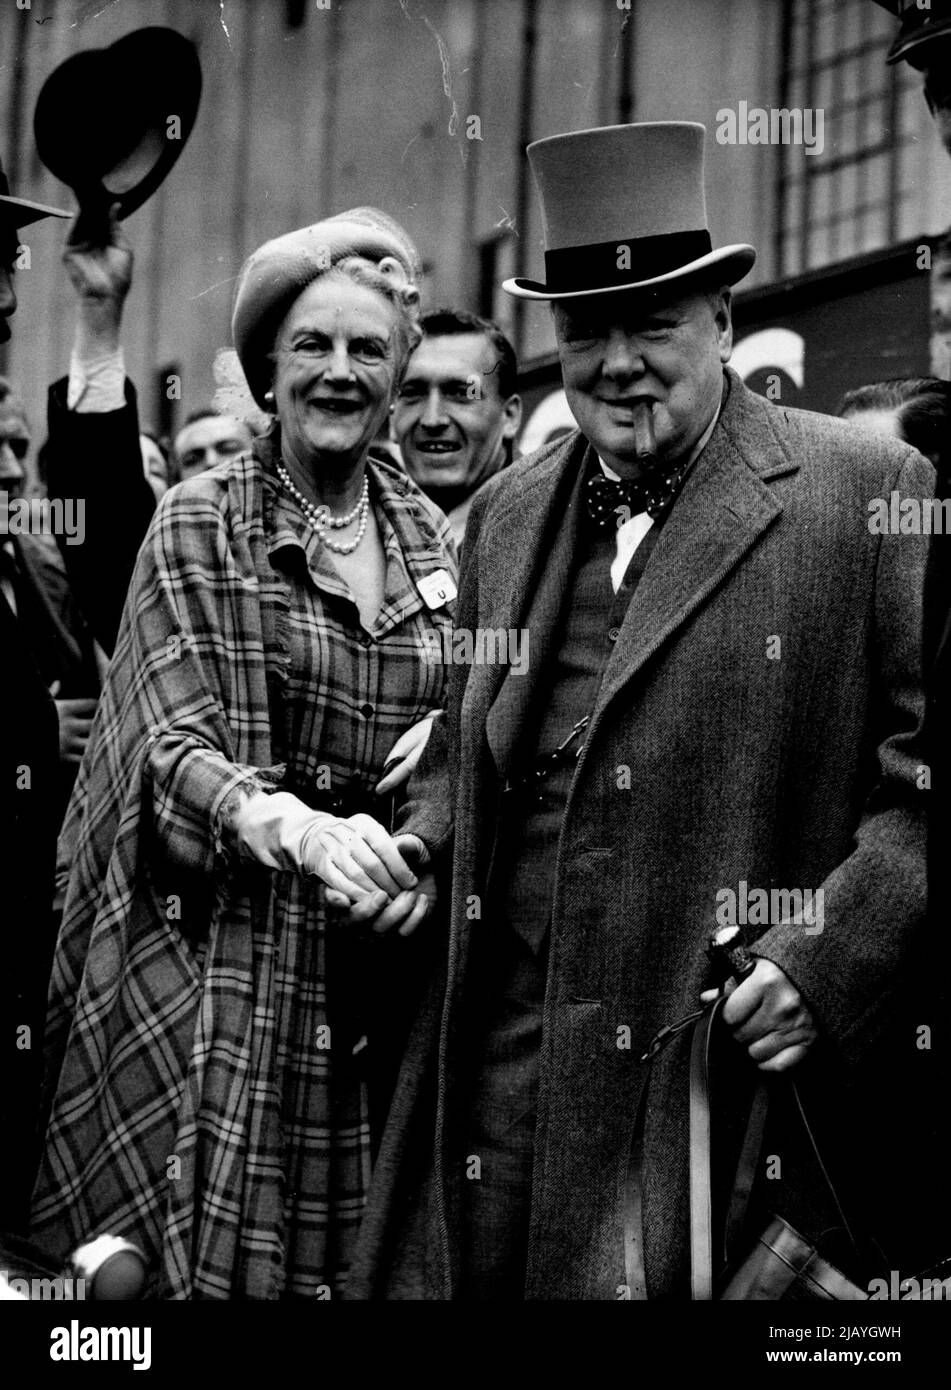 Backing Conservative? Mr. and Mrs. Winston Churchill arrive at Epsom for the Derby today, June 4, Obvious bet for Britain's Tory Leader was Conservative. June 15, 1949. (Photo by Associated Press Photo). Stock Photo